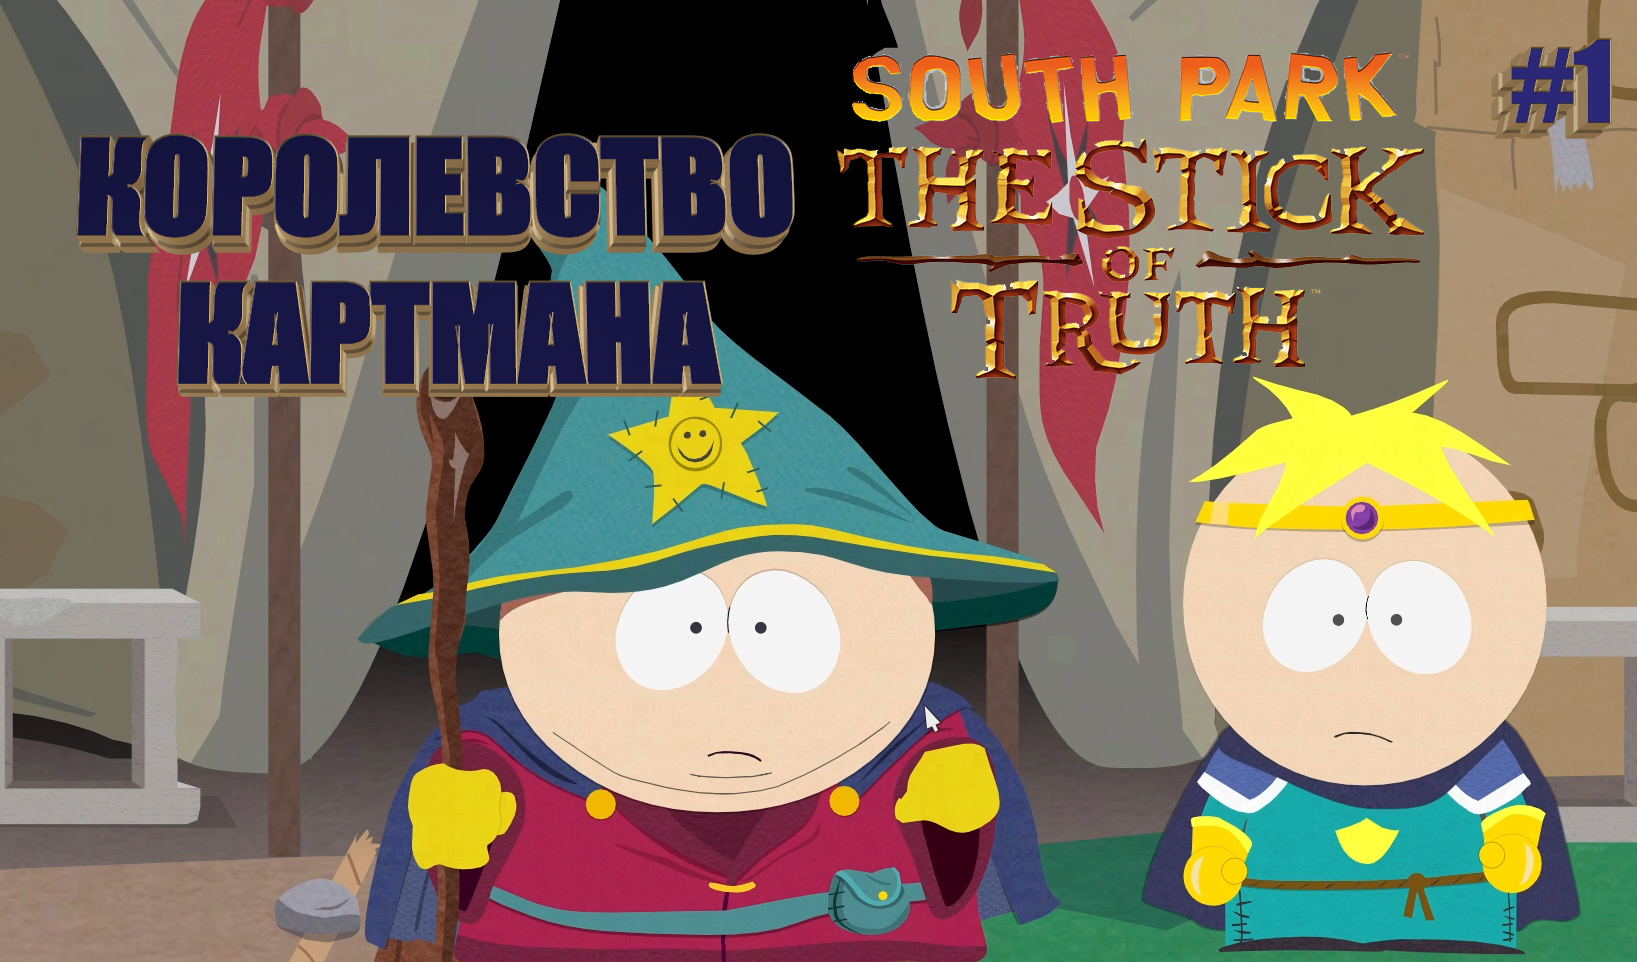 South Park: The Stick of Truth #1. КОРОЛЕВСТВО КАРТМАНА.